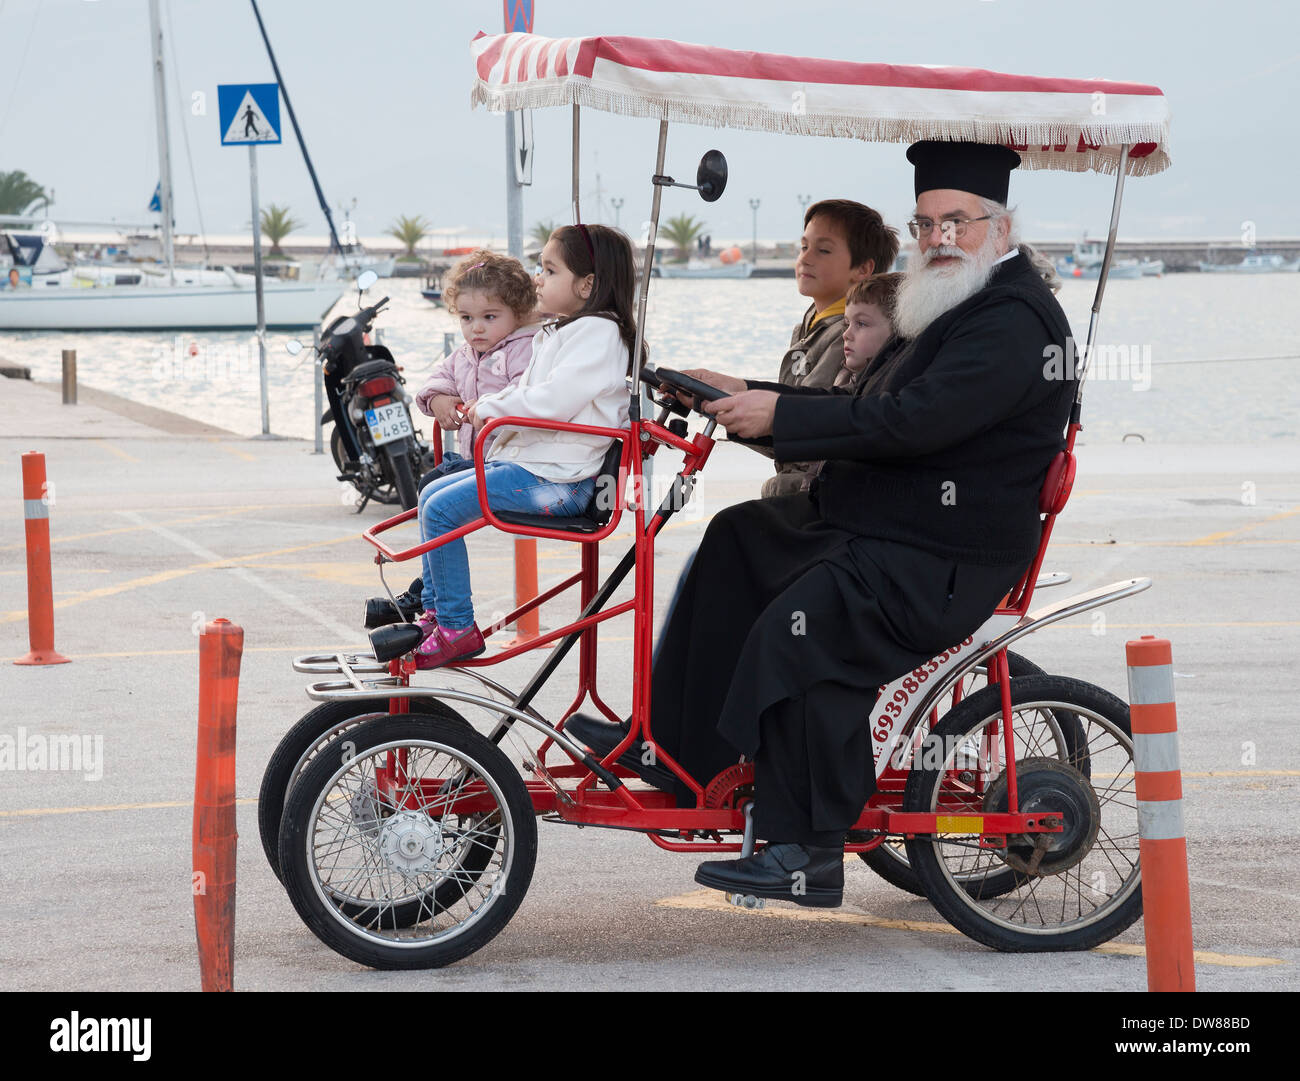 A priest and children on a tourist quadricycle in Nafplio harbour, Argolid, Peloponnese, Greece Stock Photo